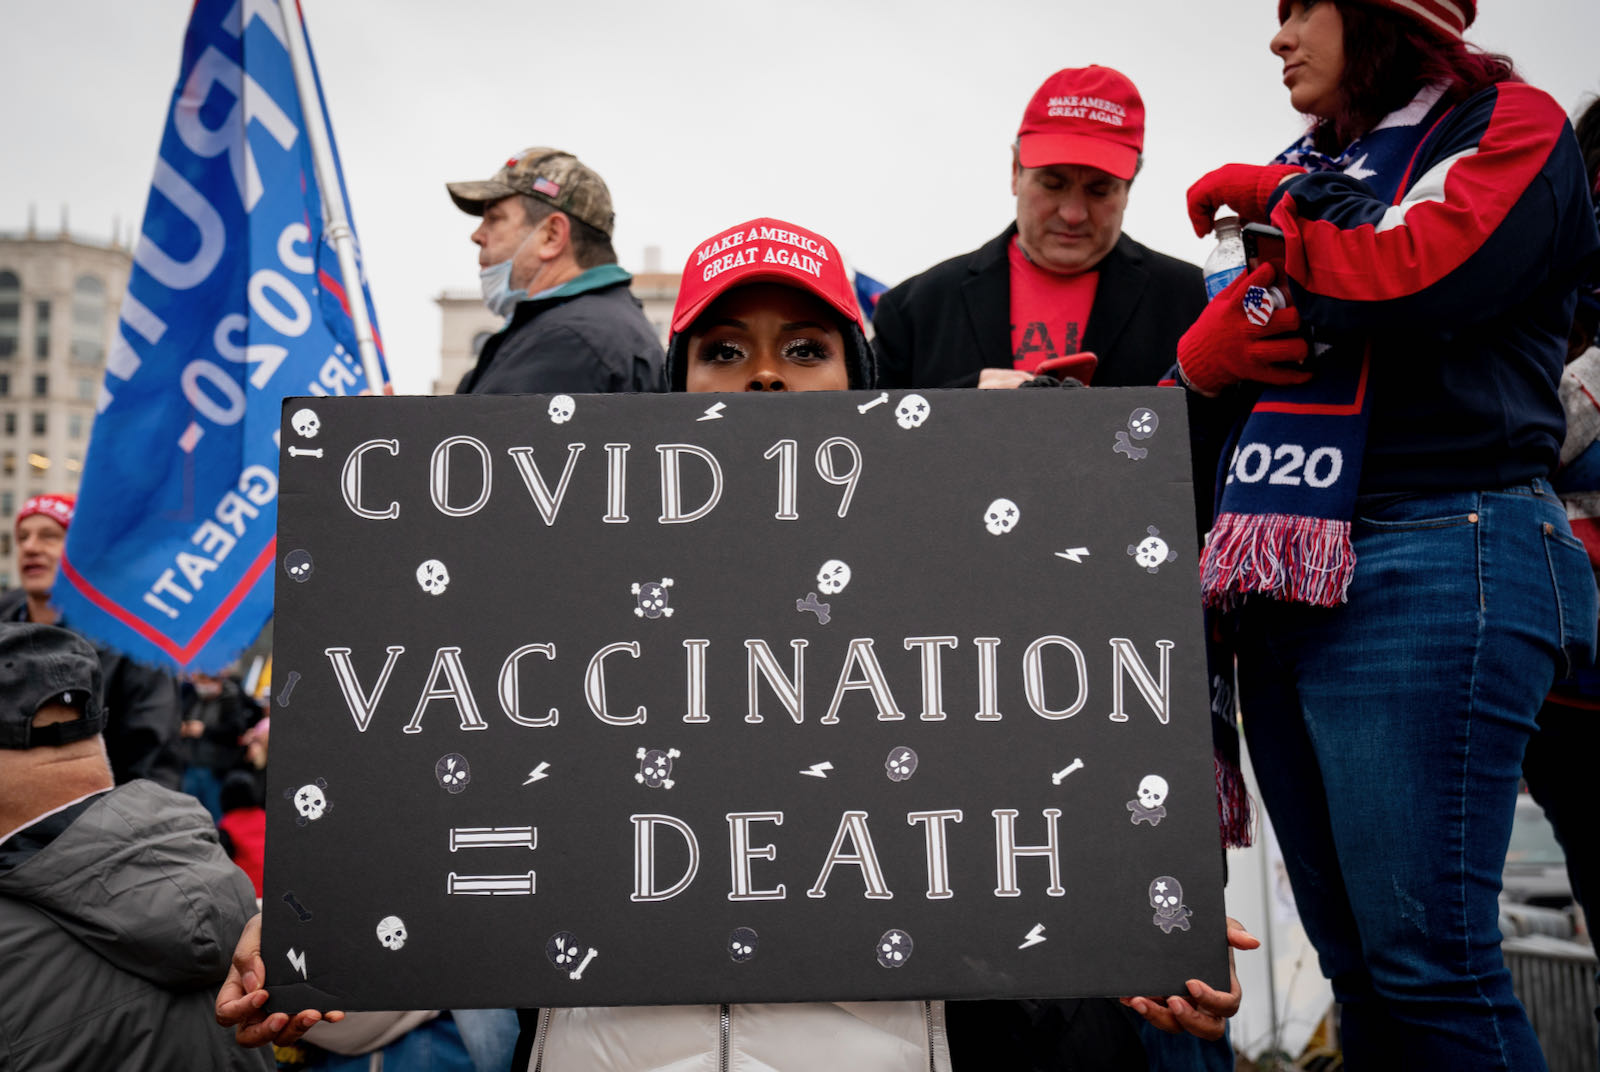 An anti-vaccine protester